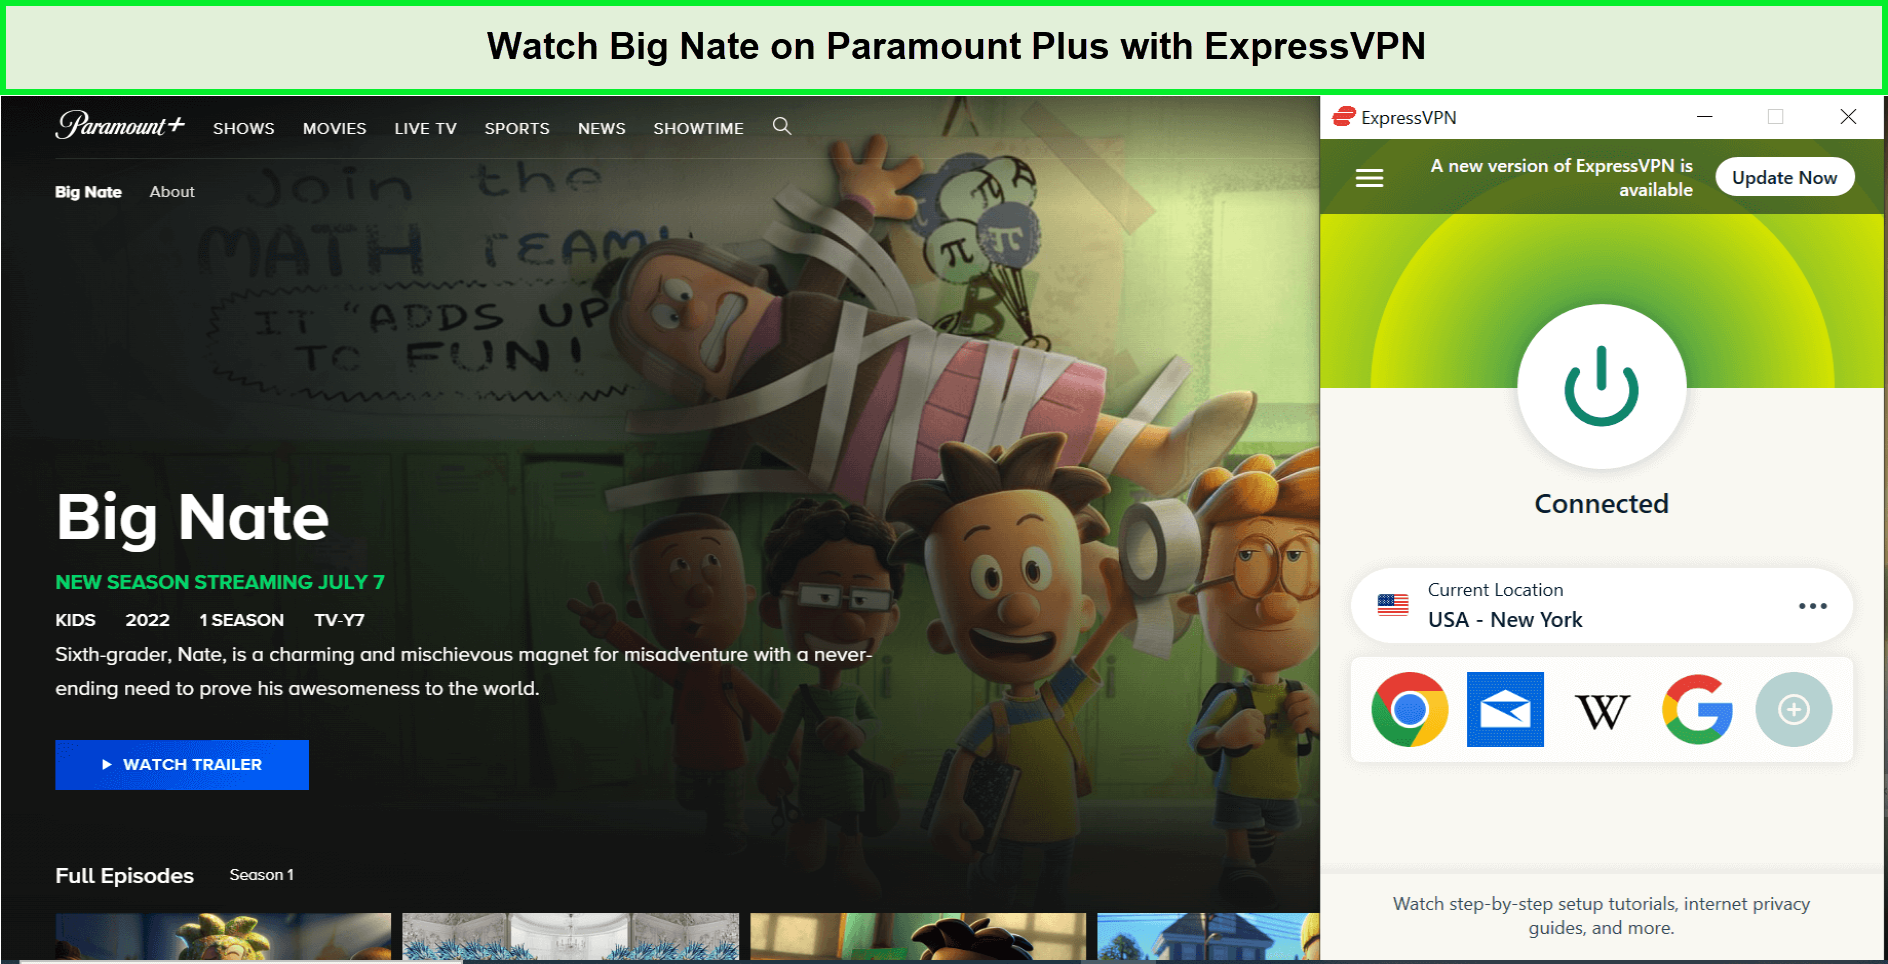 Watch-Big-Nate-Season-2-in-New Zealand-on-Paramount-Plus-with-ExpressVPN